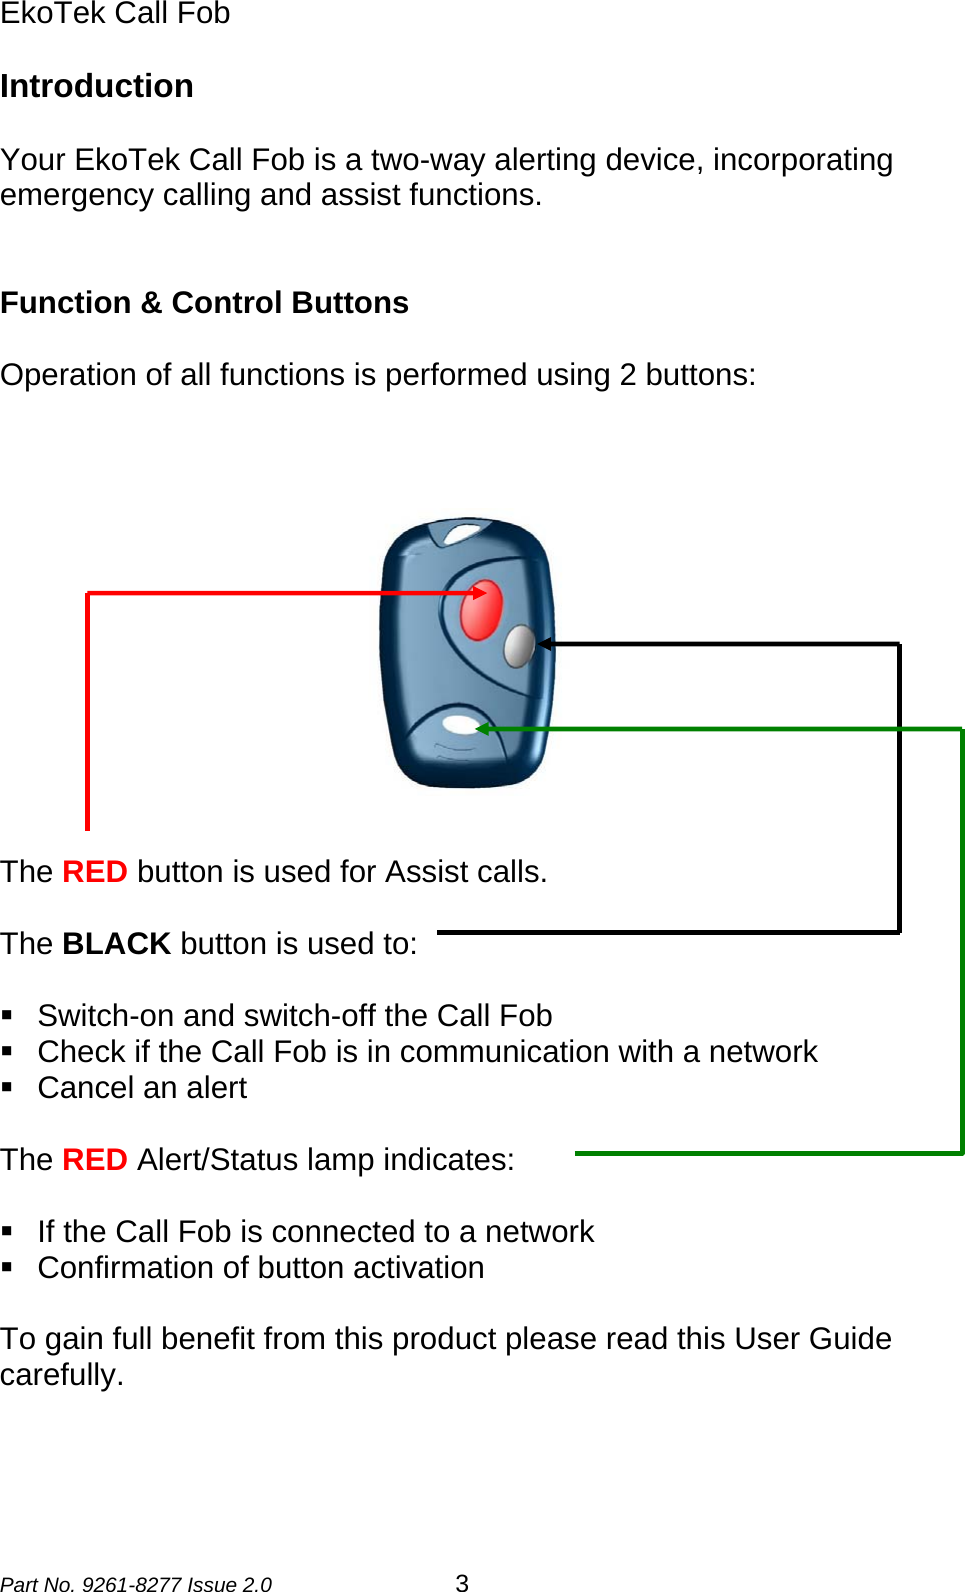 EkoTek Call Fob  Introduction  Your EkoTek Call Fob is a two-way alerting device, incorporating emergency calling and assist functions.   Function &amp; Control Buttons  Operation of all functions is performed using 2 buttons:   The RED button is used for Assist calls.  The BLACK button is used to:    Switch-on and switch-off the Call Fob   Check if the Call Fob is in communication with a network   Cancel an alert  The RED Alert/Status lamp indicates:    If the Call Fob is connected to a network   Confirmation of button activation  To gain full benefit from this product please read this User Guide carefully.    Part No. 9261-8277 Issue 2.0  3 